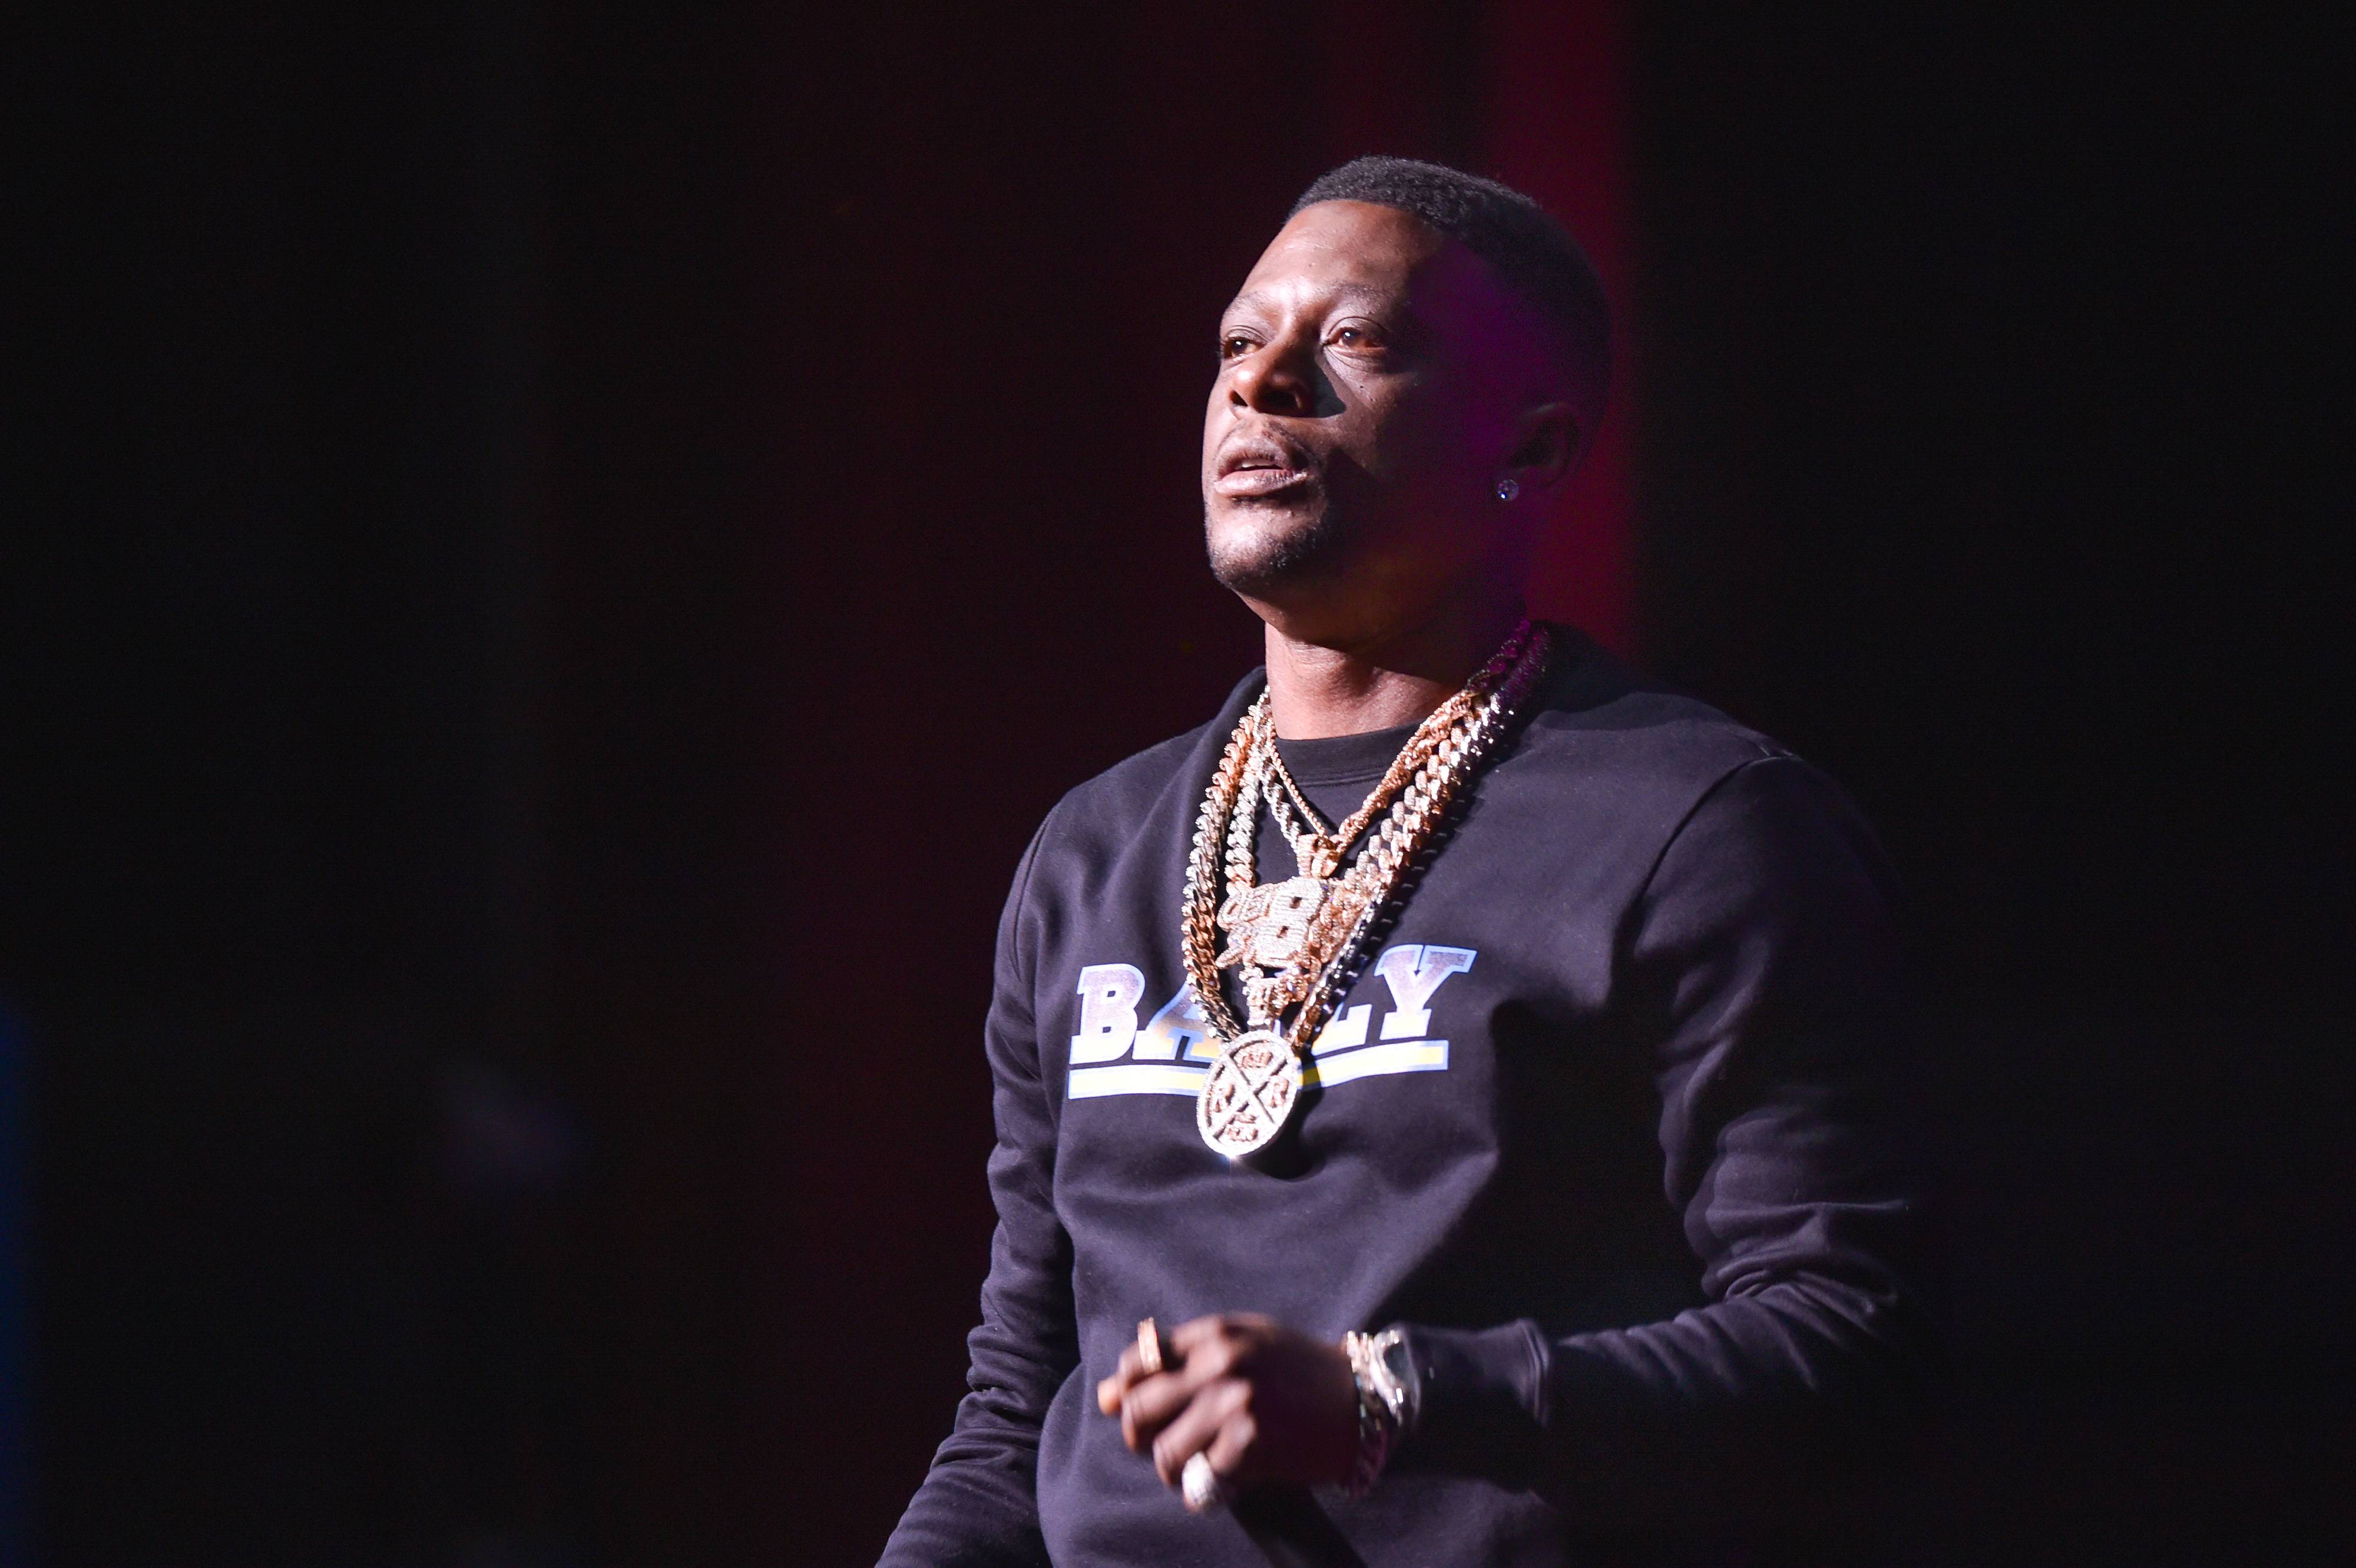 DETROIT, MICHIGAN - JANUARY 18: Recording Artist Lil Boosie performs onstage during the Hip Hop Smackdown concert at the Fox Theatre on January 18, 2020 in Detroit, Michigan. (Photo by Aaron J. Thornton/Getty Images)